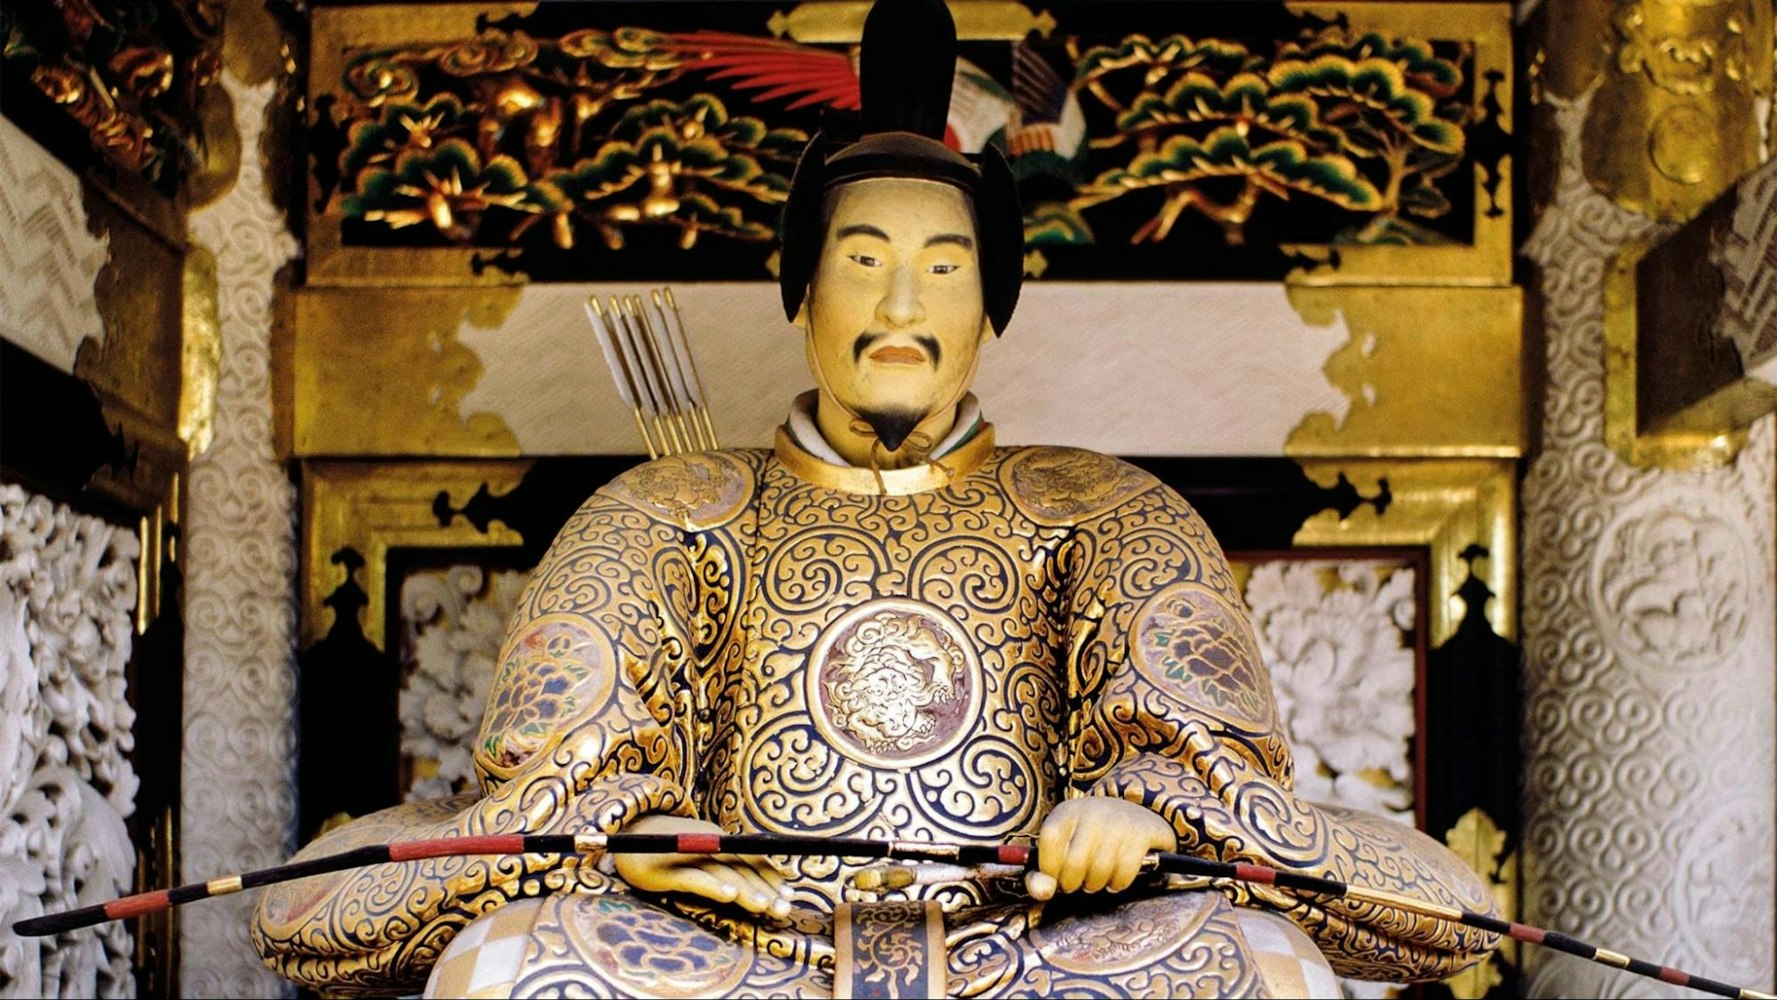 A regal golden statue of an ancient Japanese ruler seated on a throne, adorned in gleaming armor, with a crossbow and arrows displayed behind.